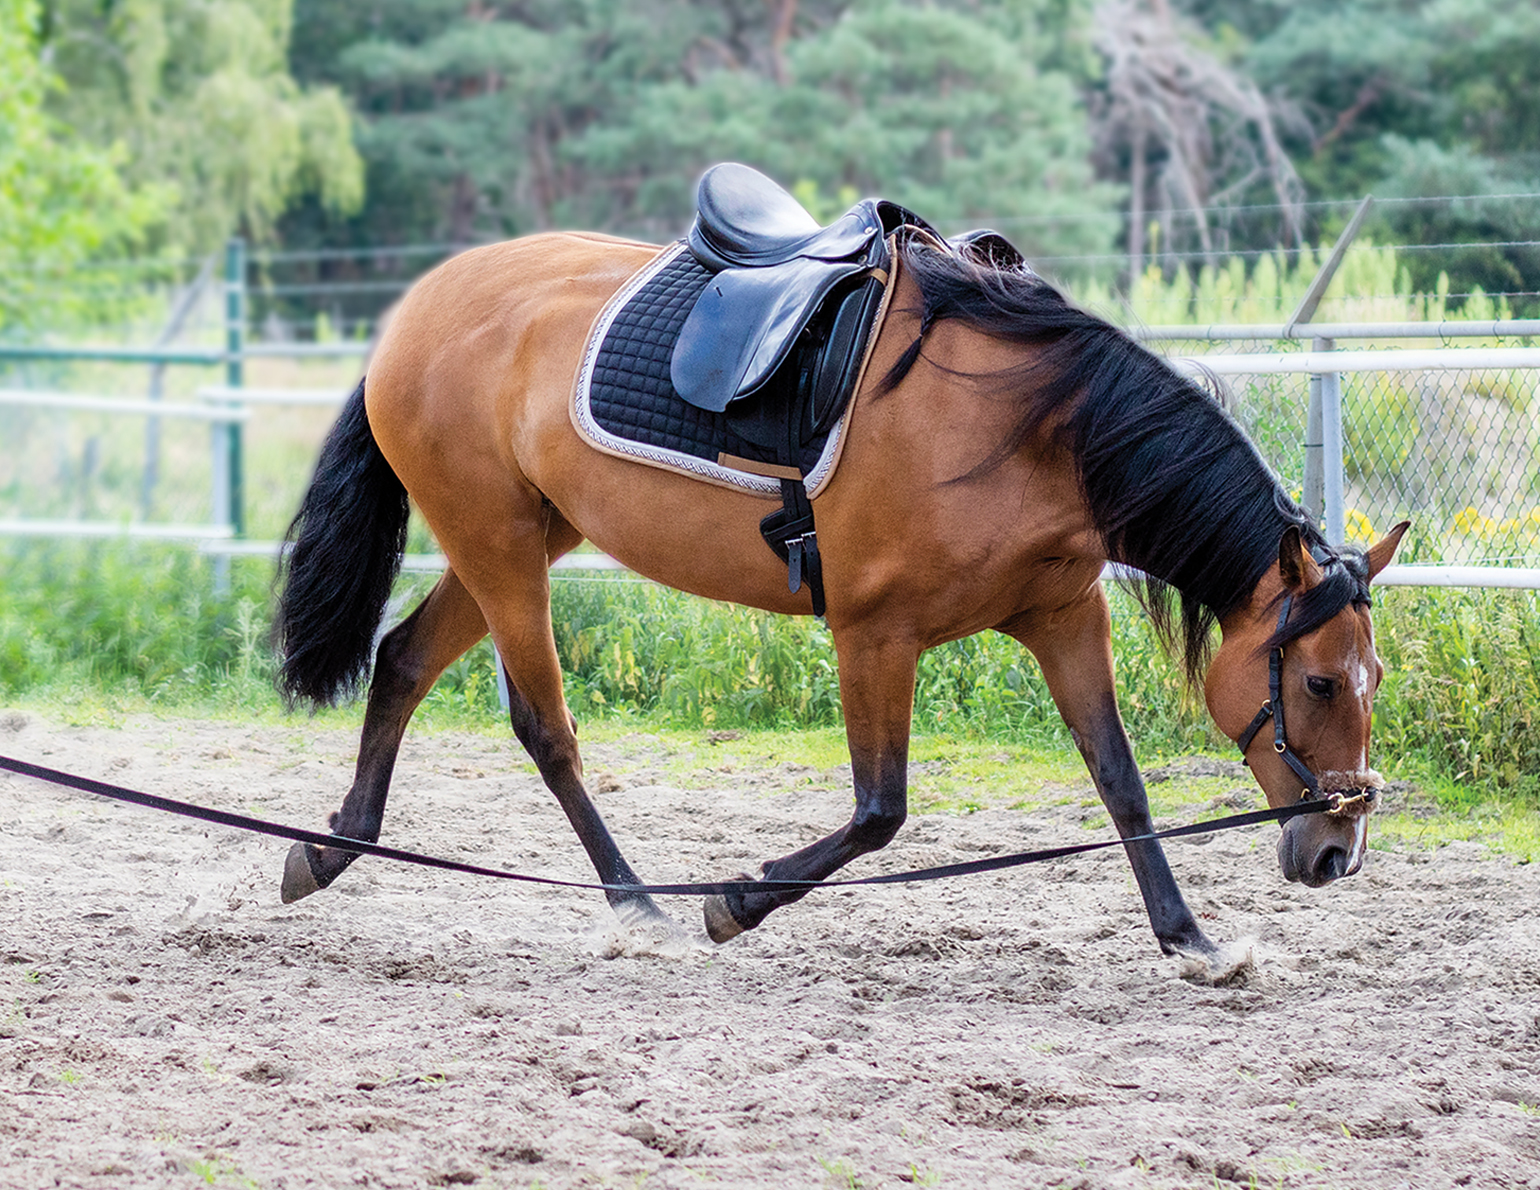 Shop Western Dressage Halters – People On Horses – Ride With Expression!